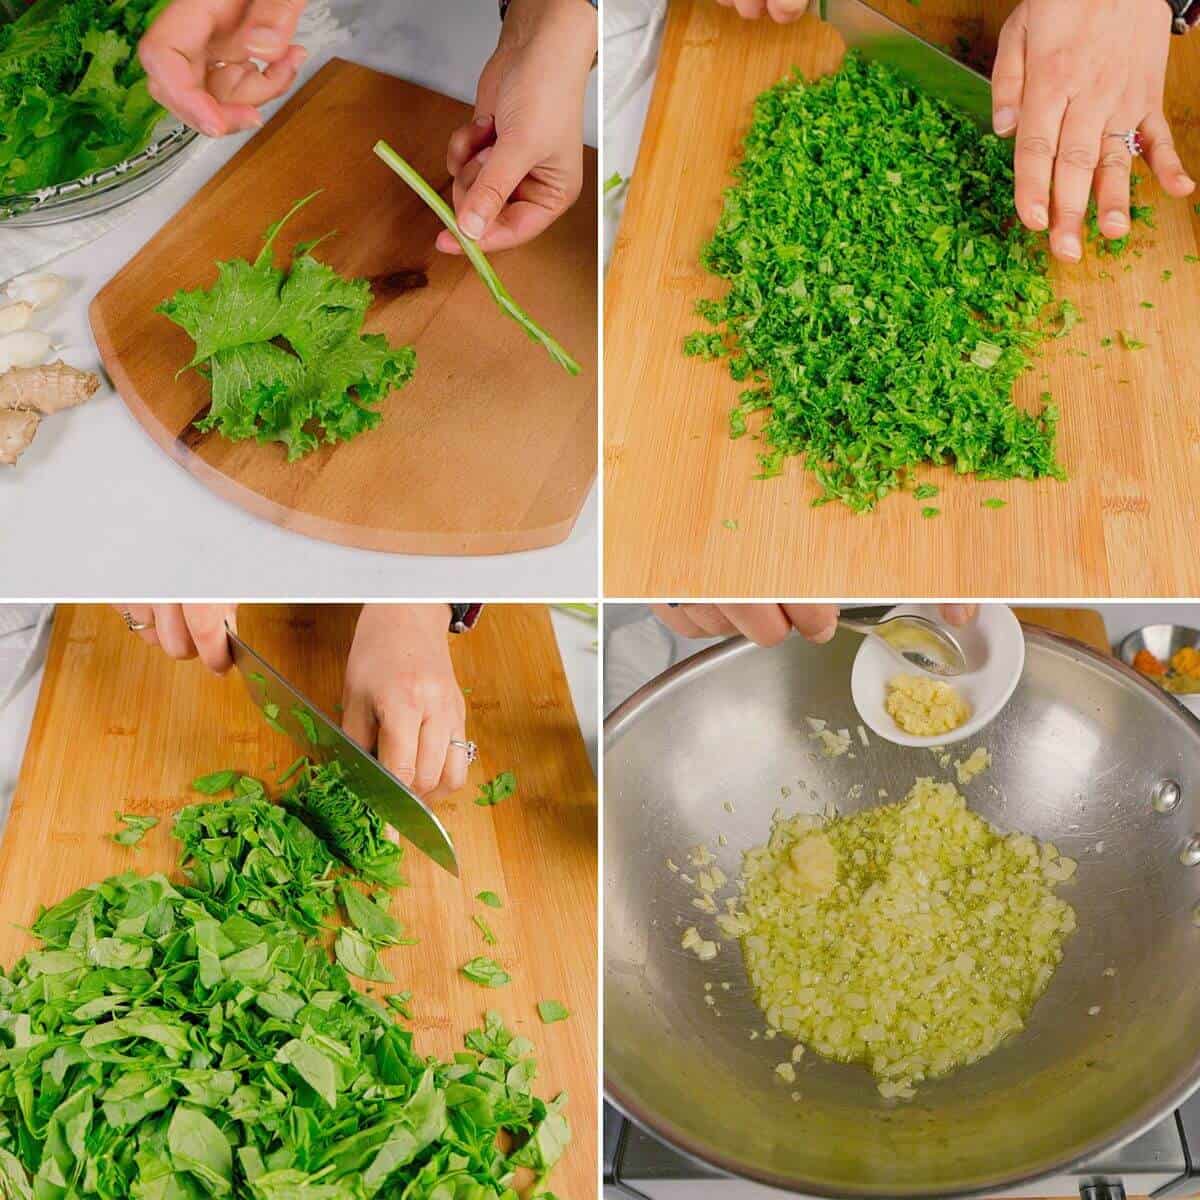 Preparing the greens and cooking the aromatics.